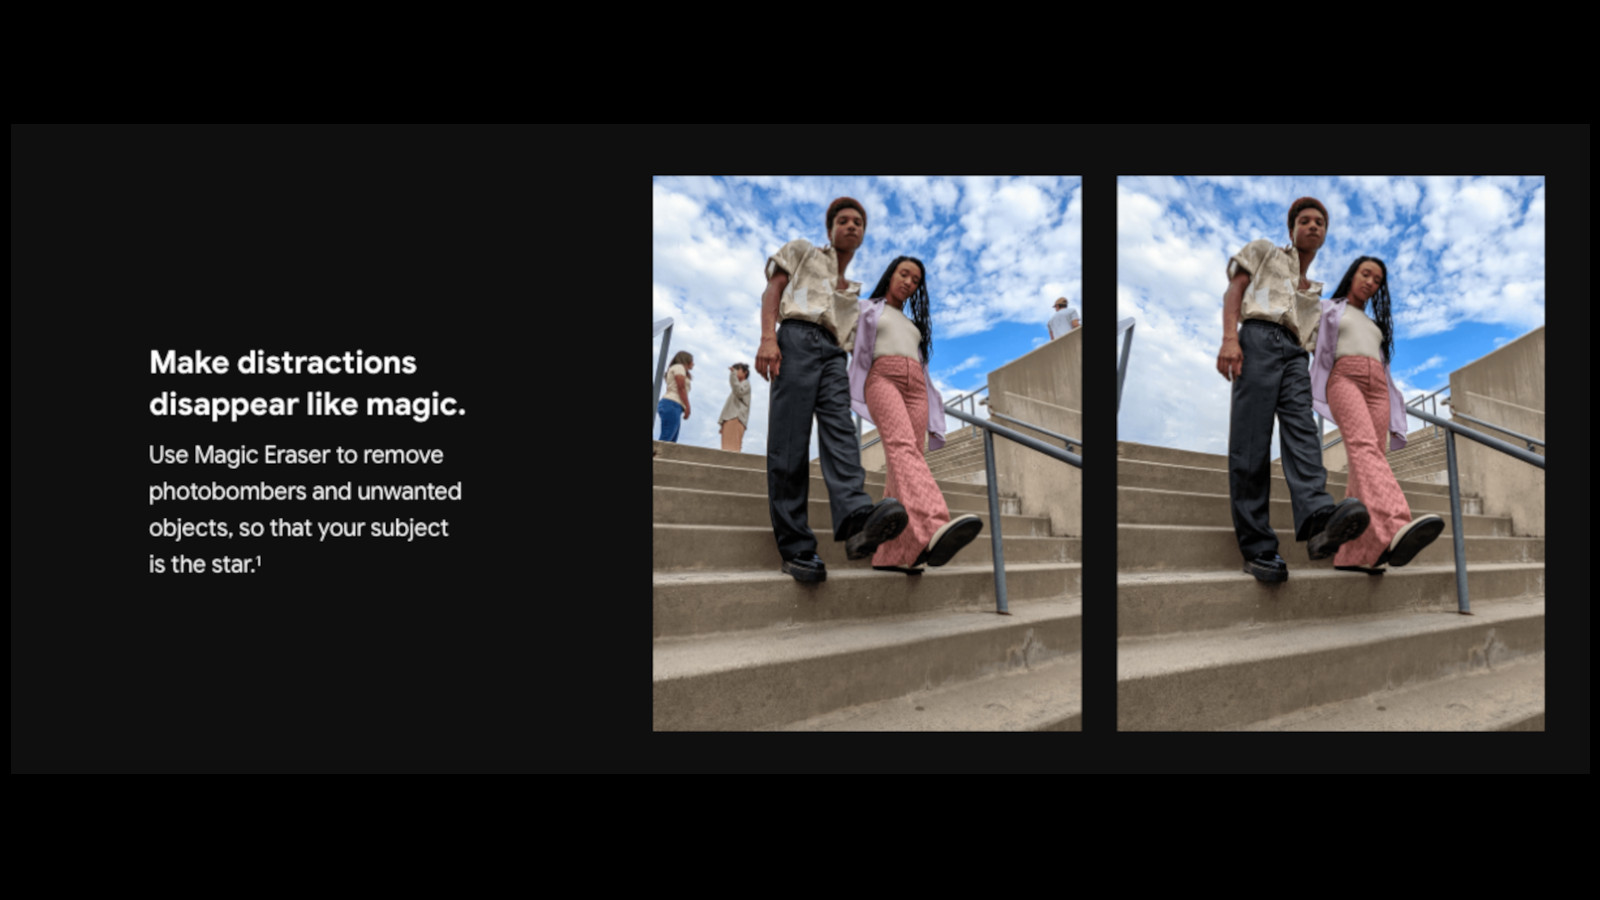 Part of the leaked marketing materials for the Google Pixel 6 Pro, showing how the Magic Eraser feature works by removing people from the background of an image